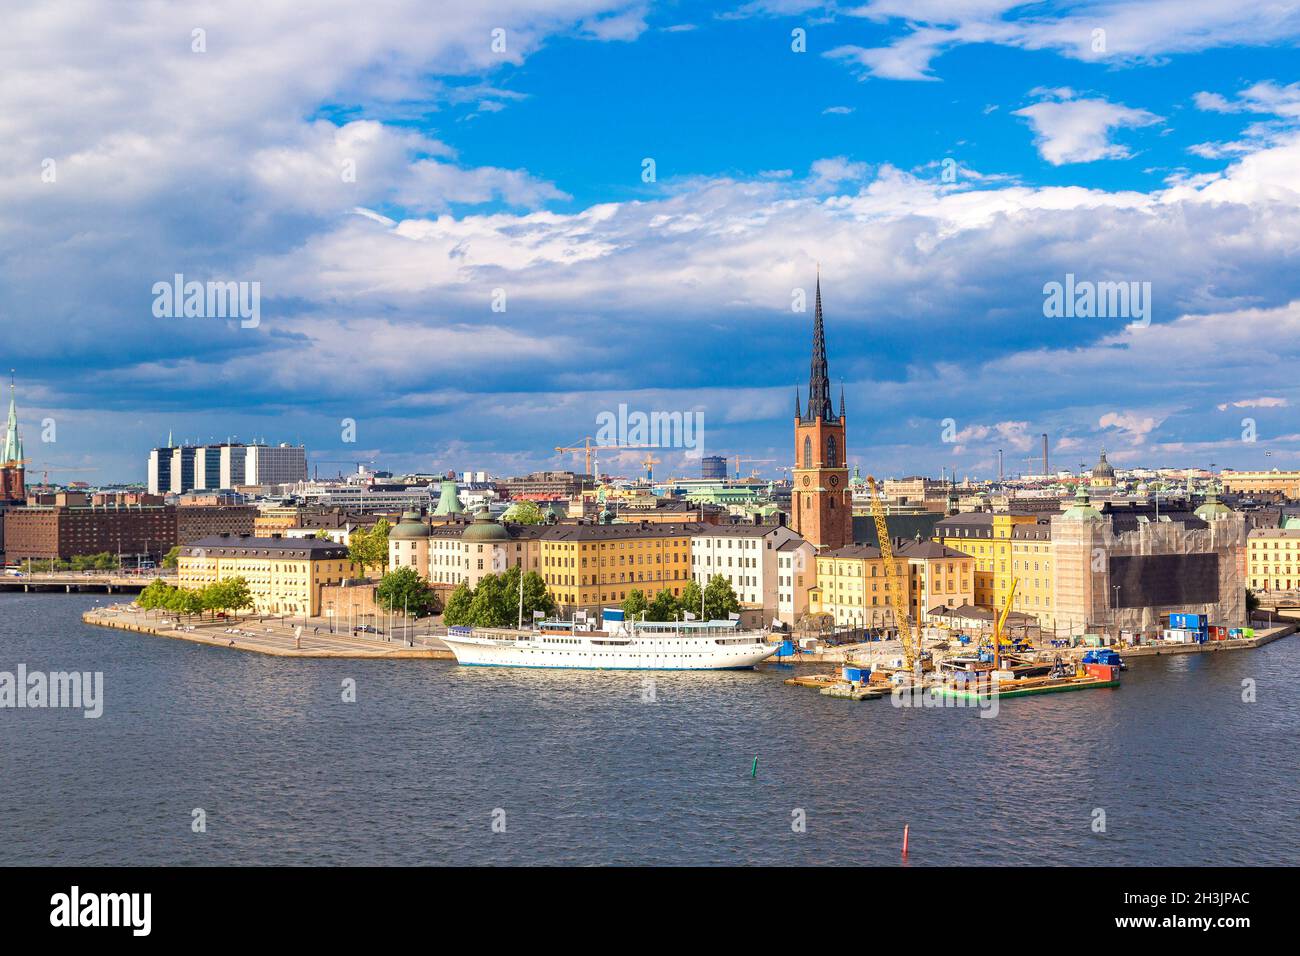 Gamla Stan, the old part of Stockholm, Sweden Stock Photo